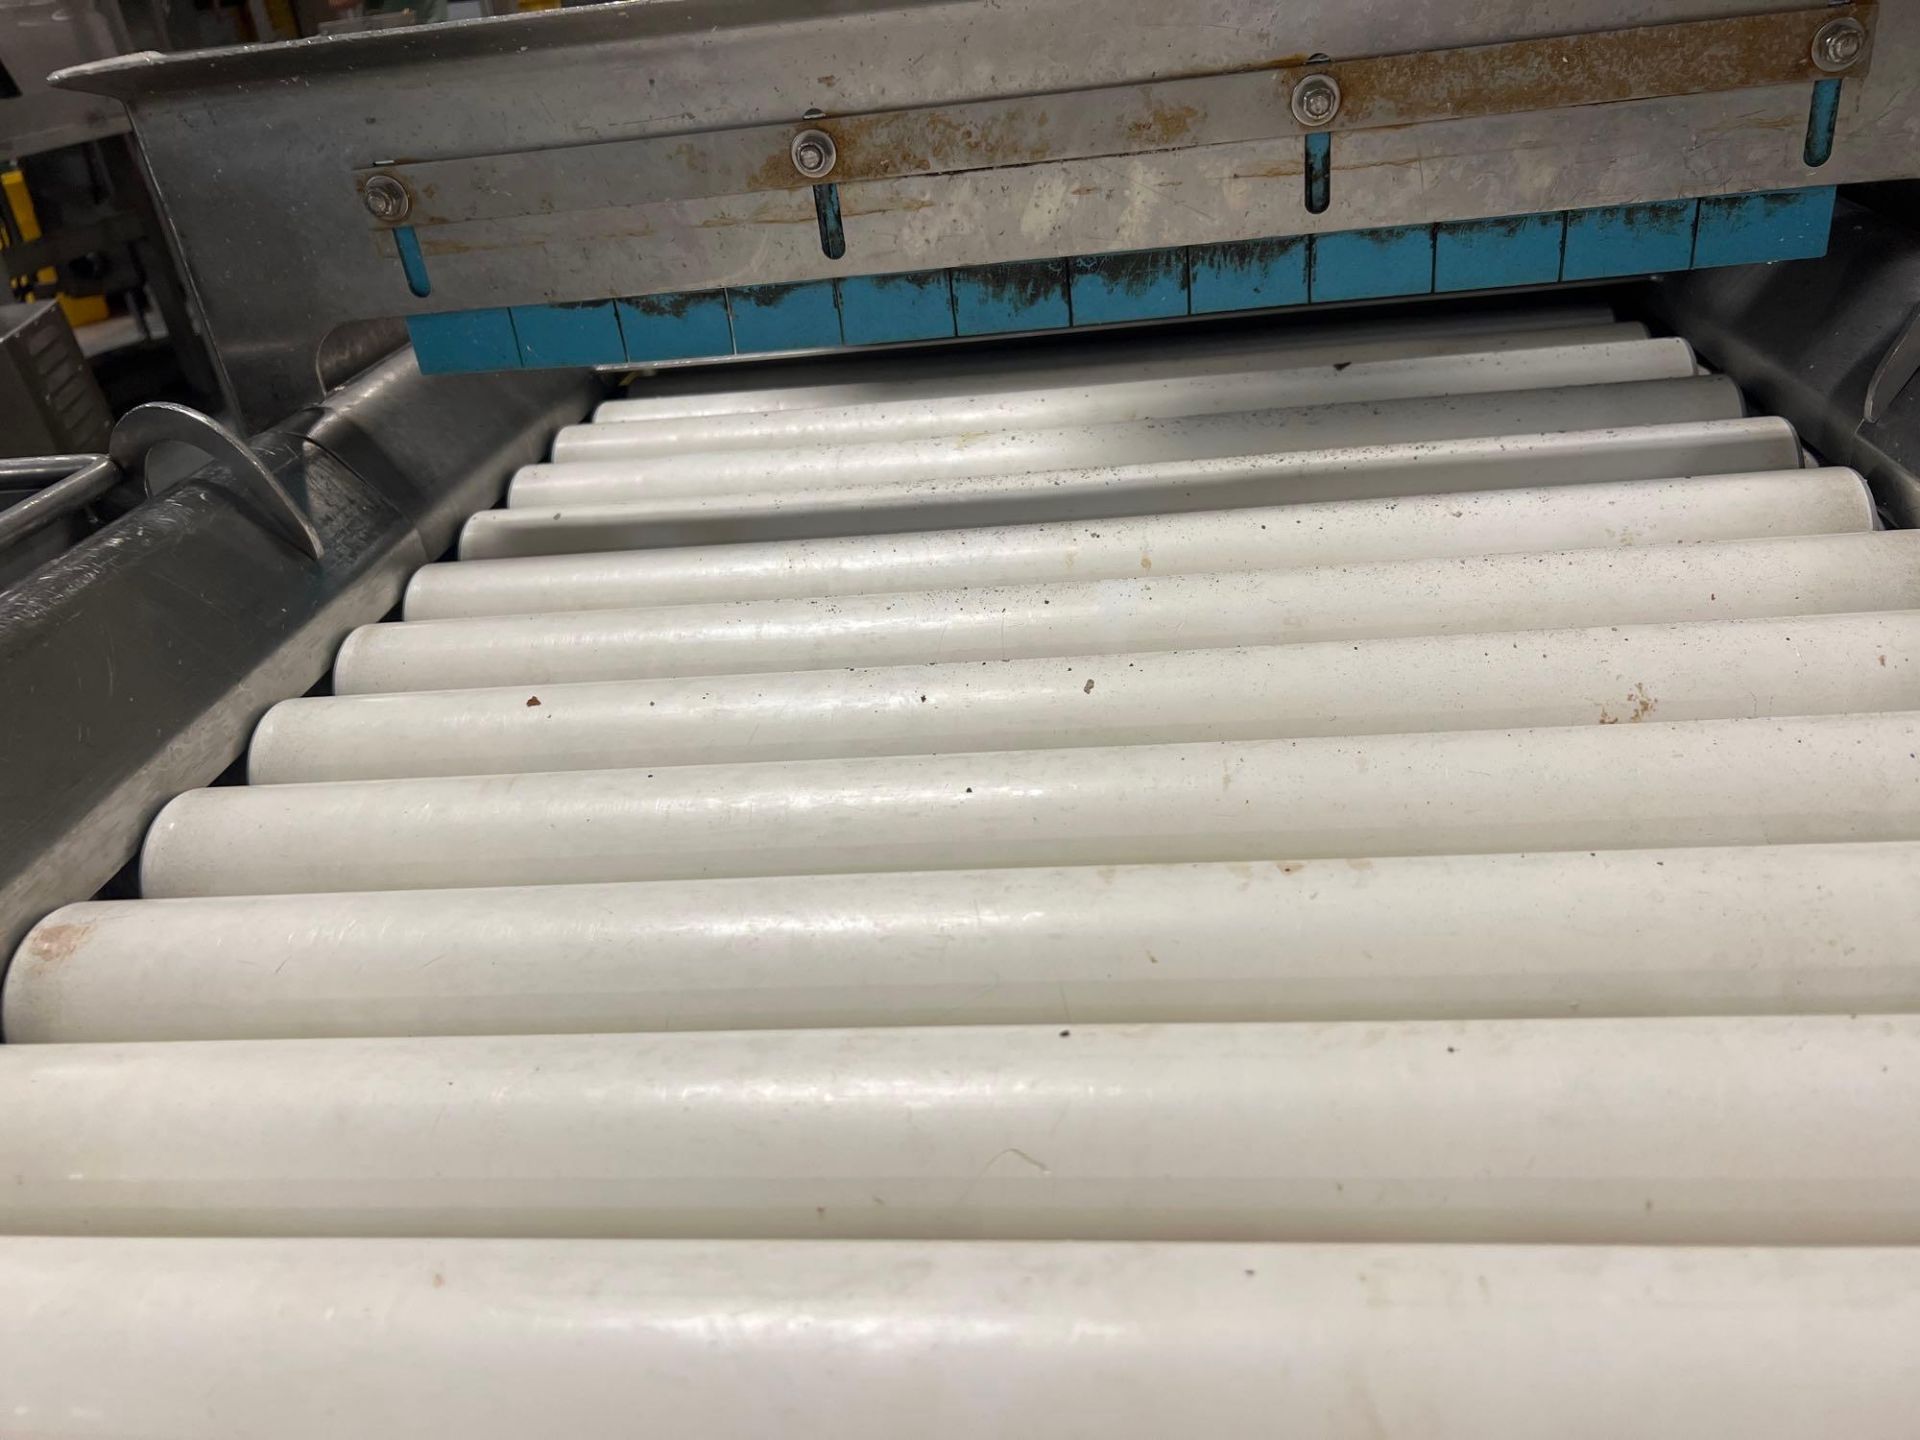 Roller conveyor with cutting stations - Image 6 of 17